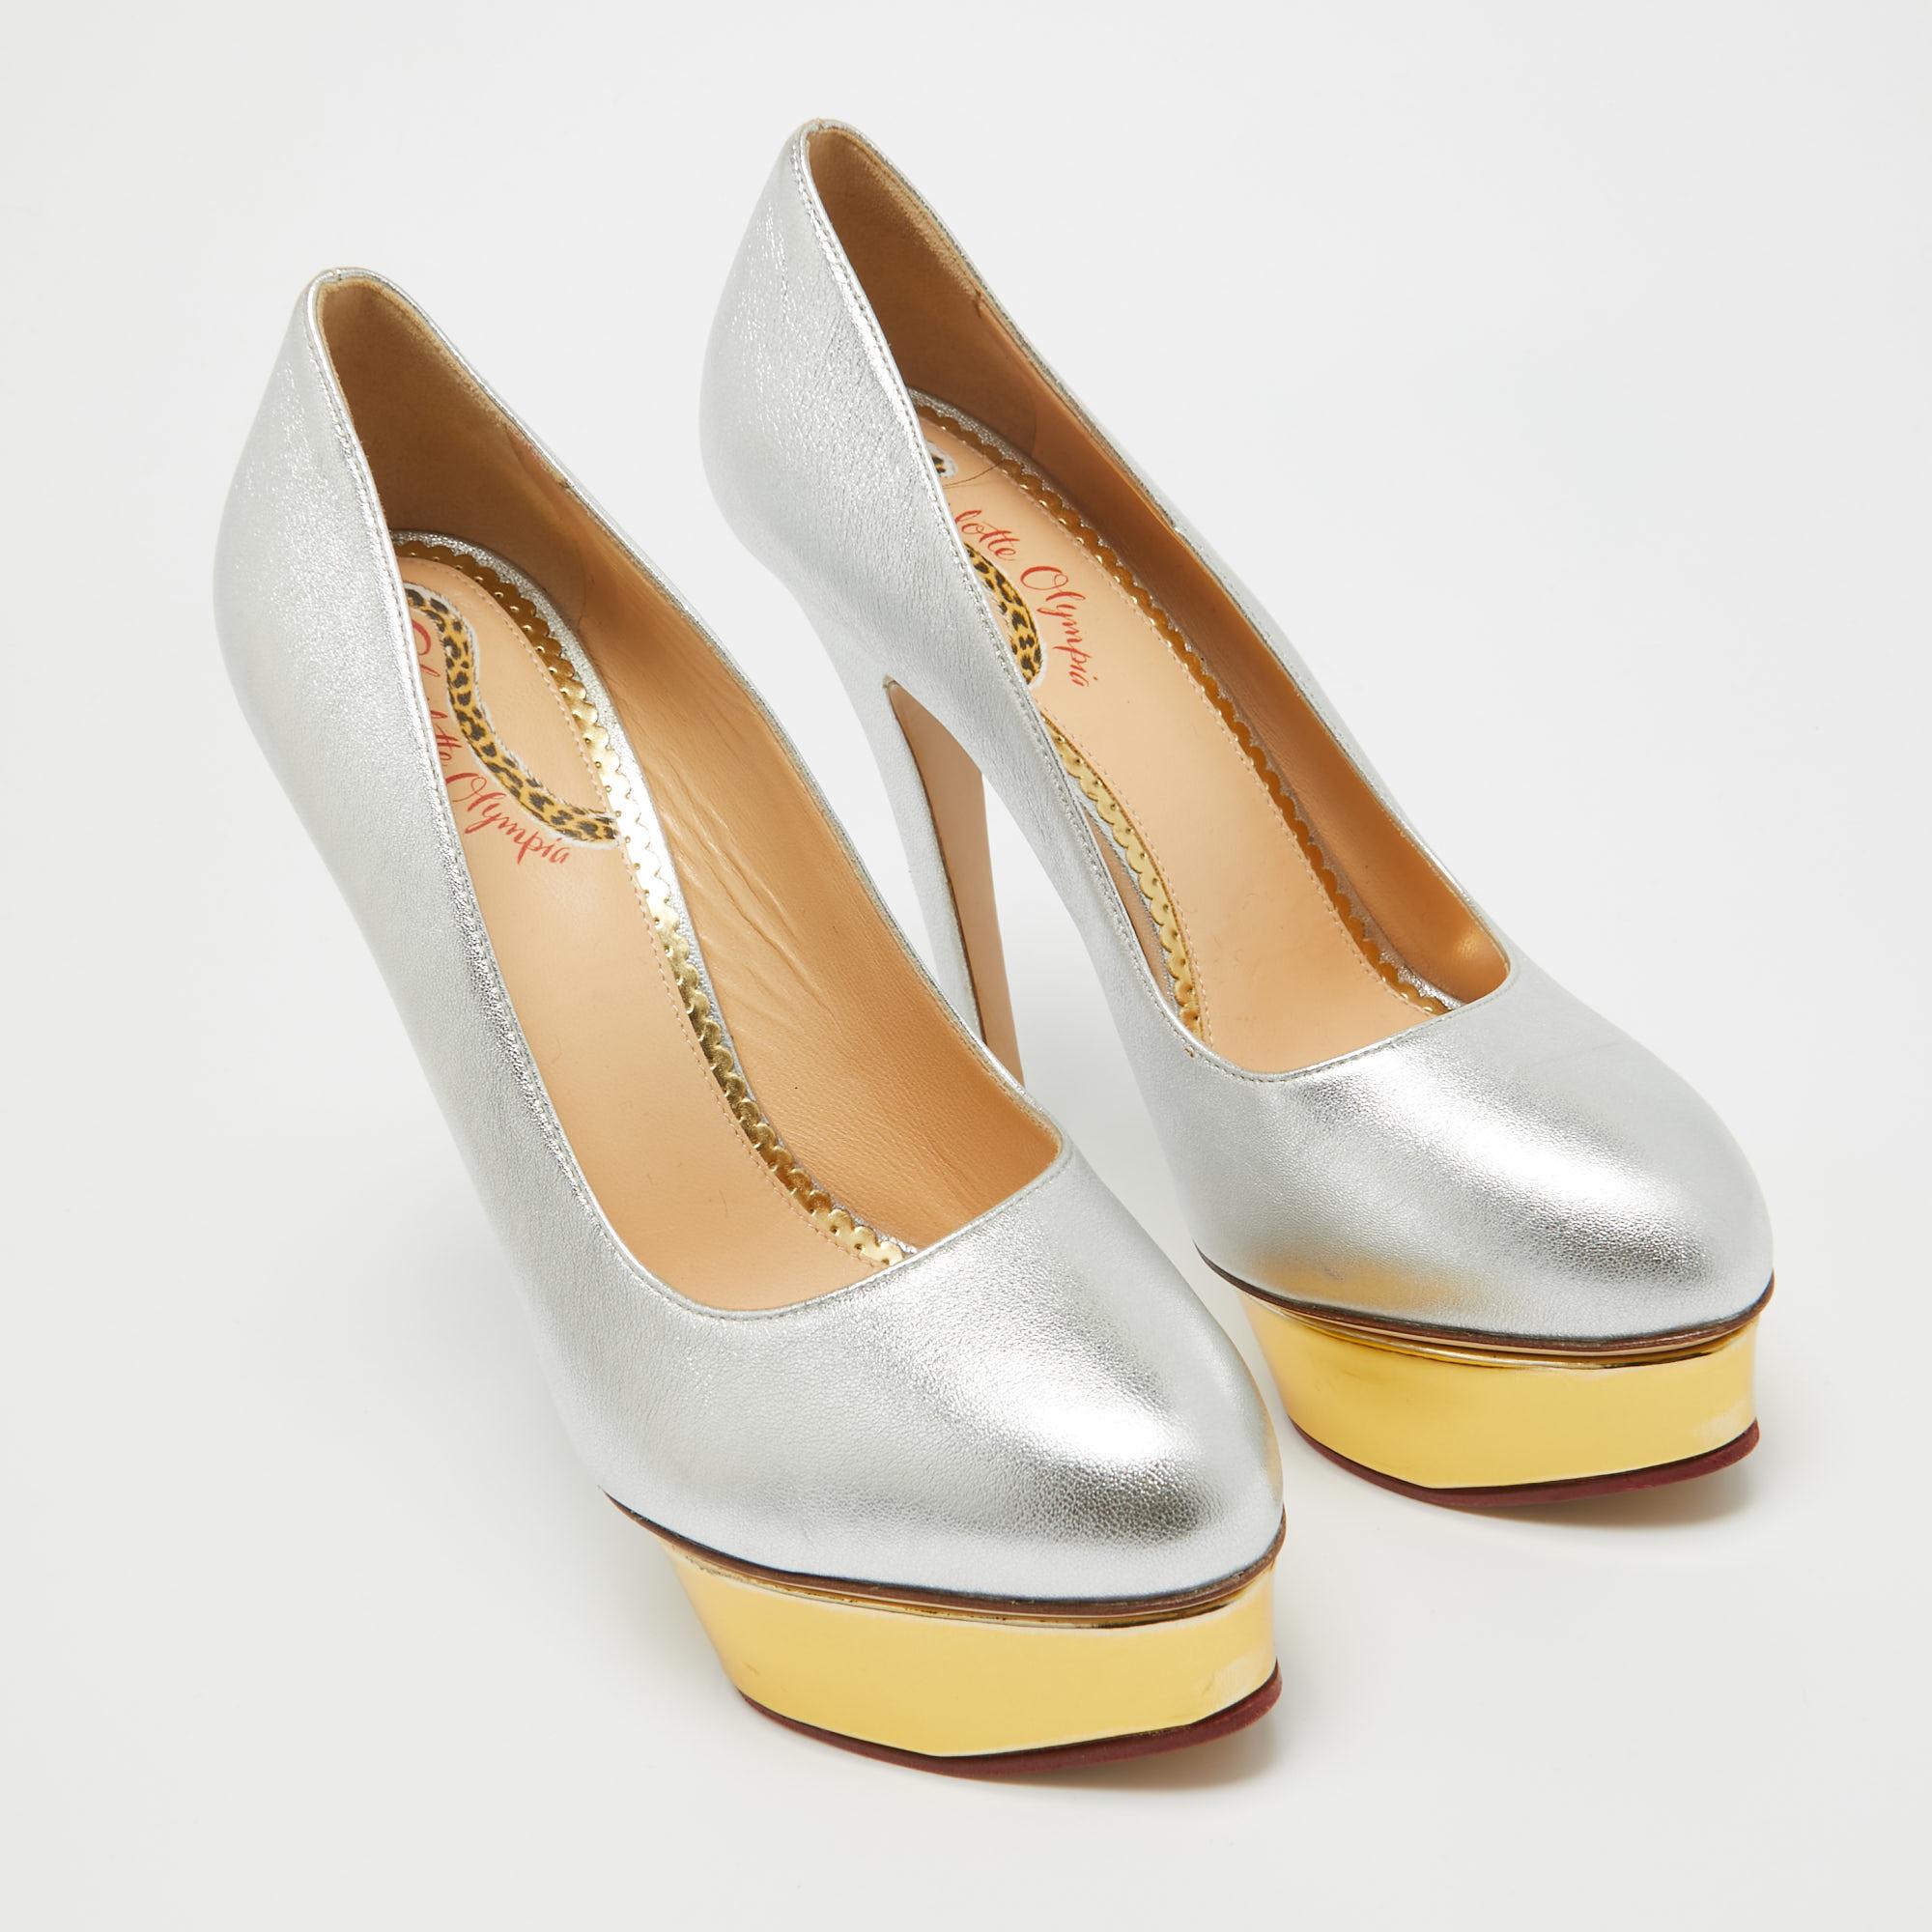 Charlotte Olympia Silver Leather Dolly Platform Pumps Size 40 For Sale 2